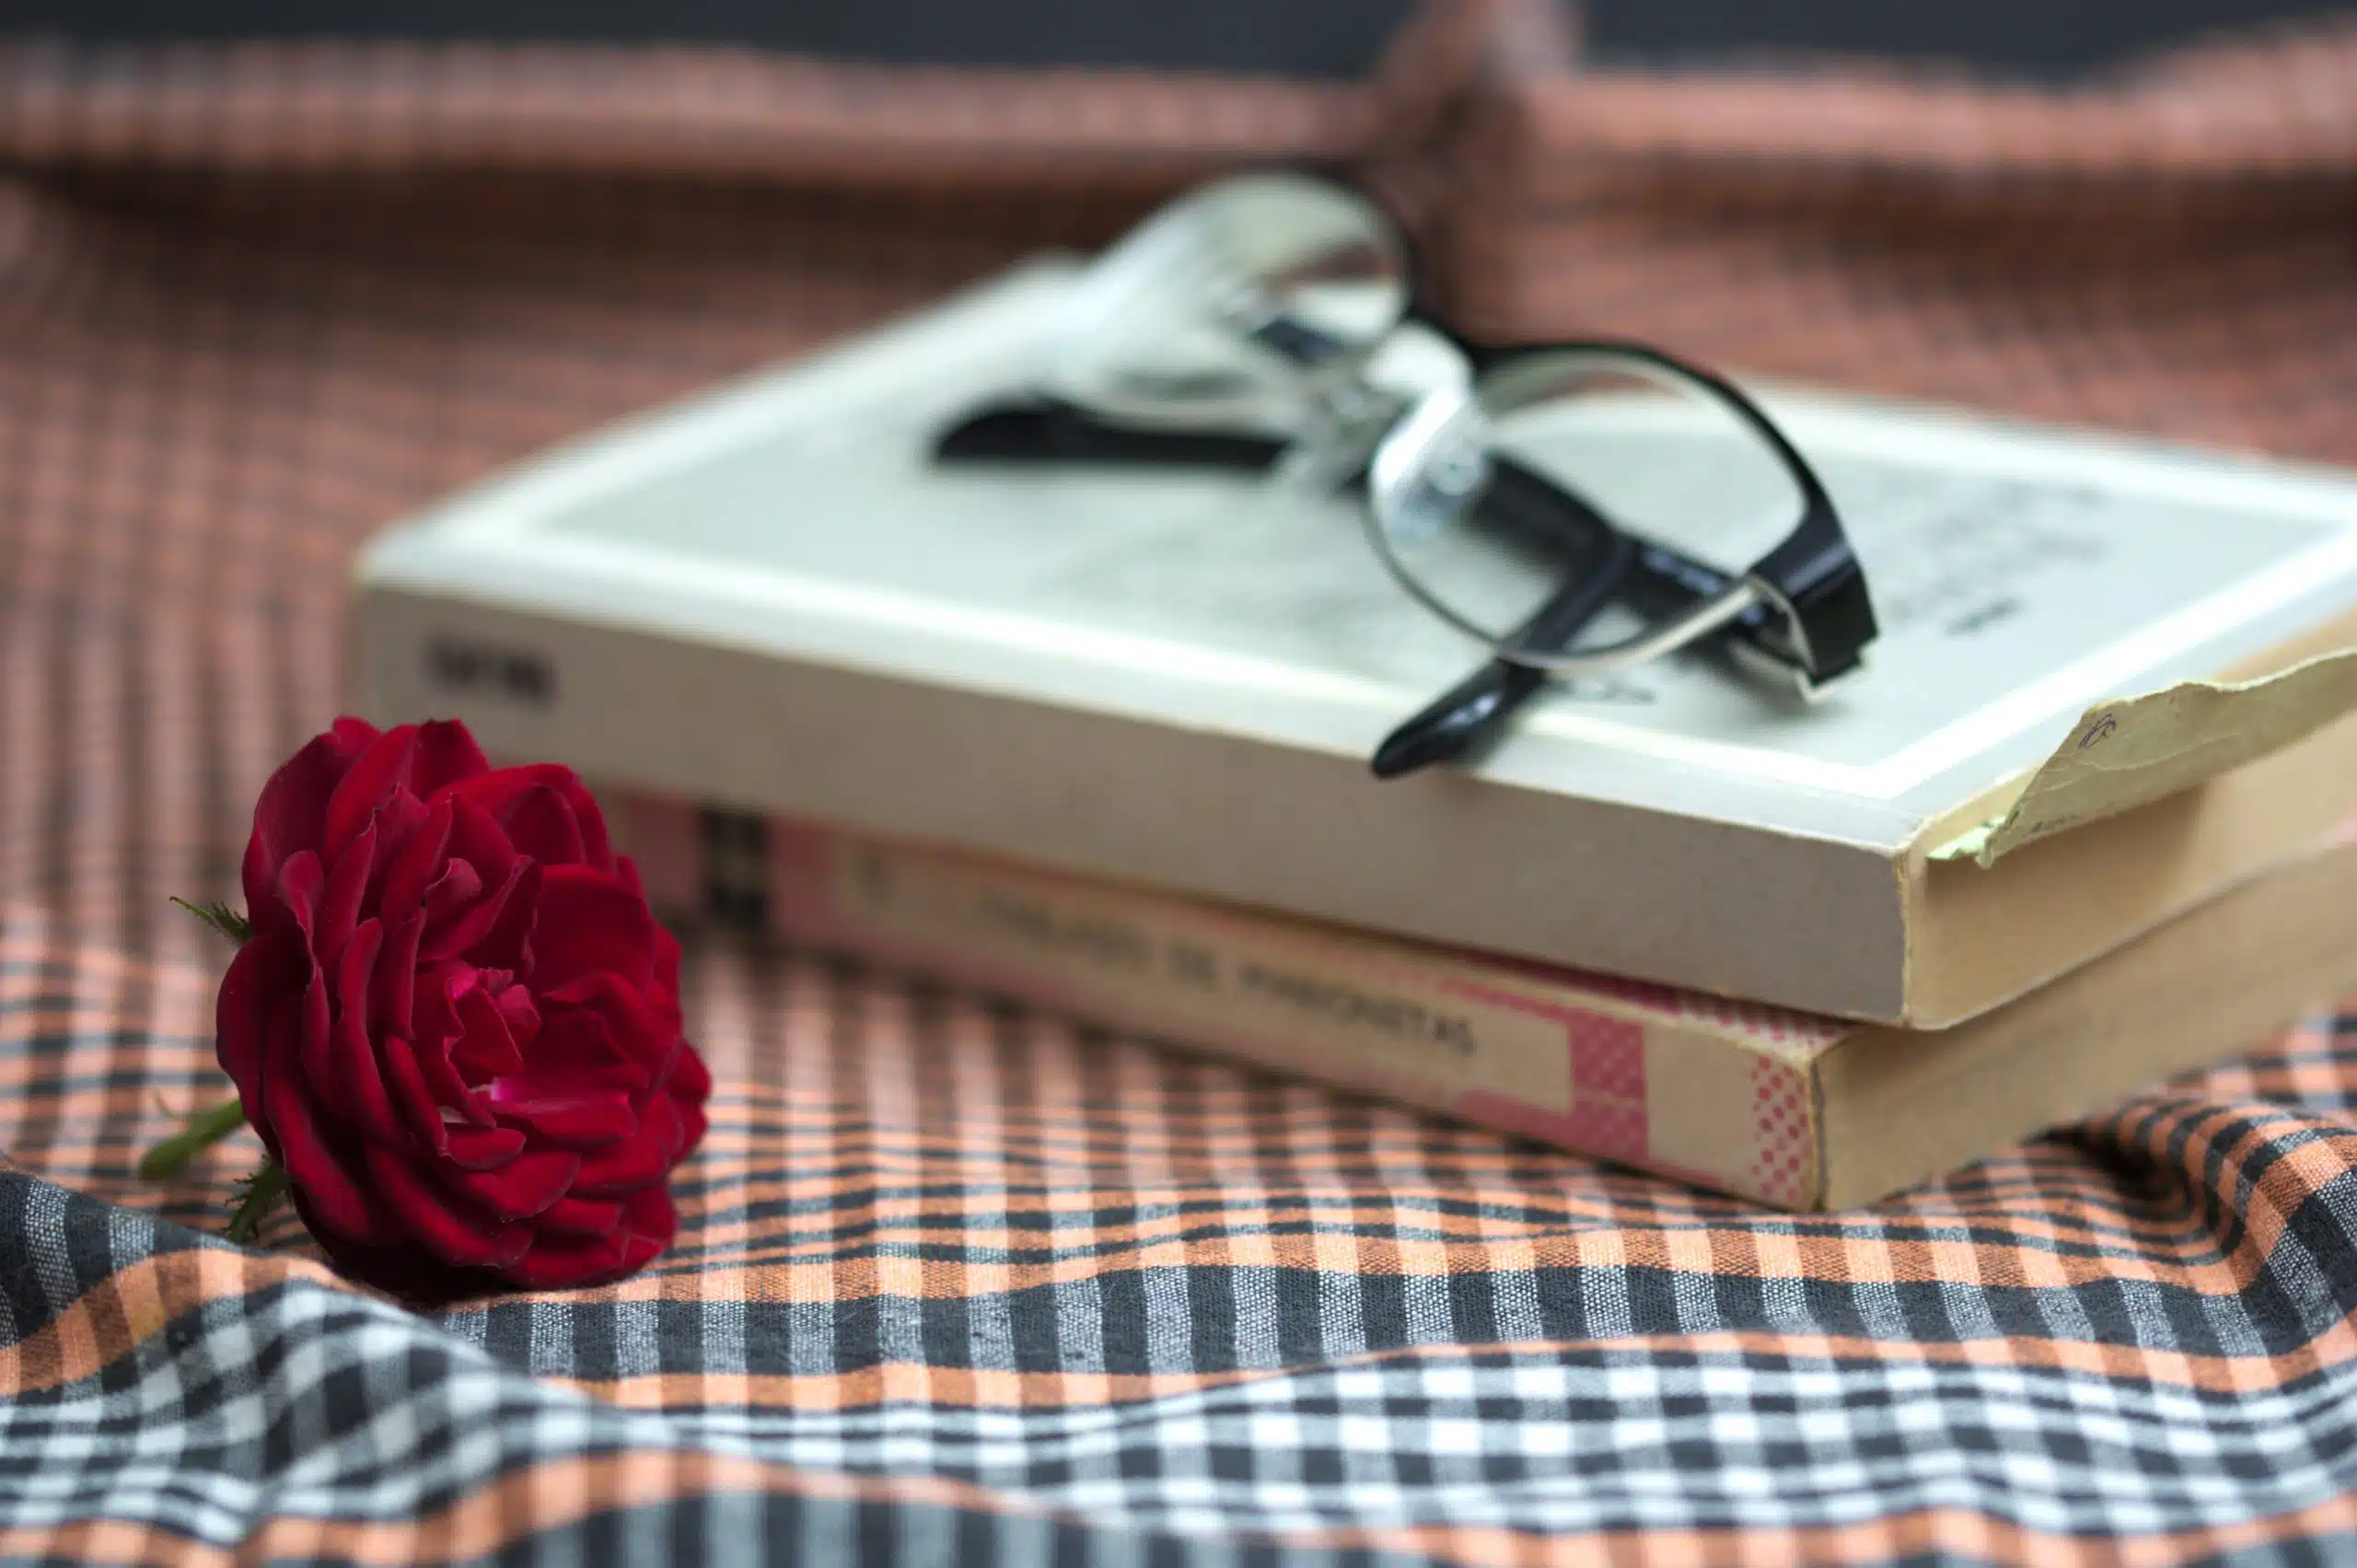 Some reading books on which there are glasses and a rose.